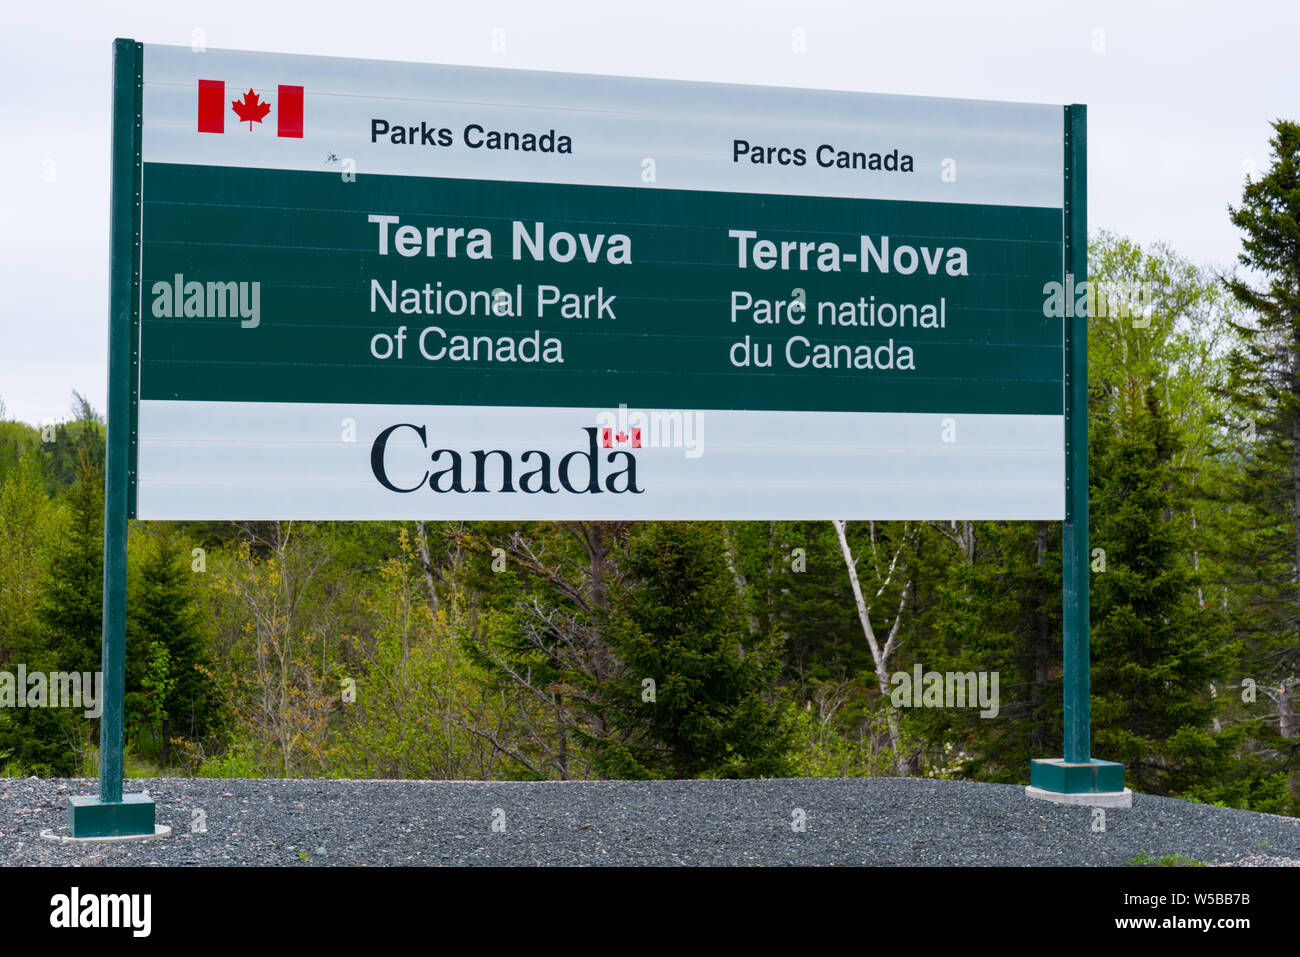 Wiltondale, Newfoundland - June 11, 2019: Welcome sign at the entrance to Terra Nova National Park in Newfoundland, Canada Stock Photo